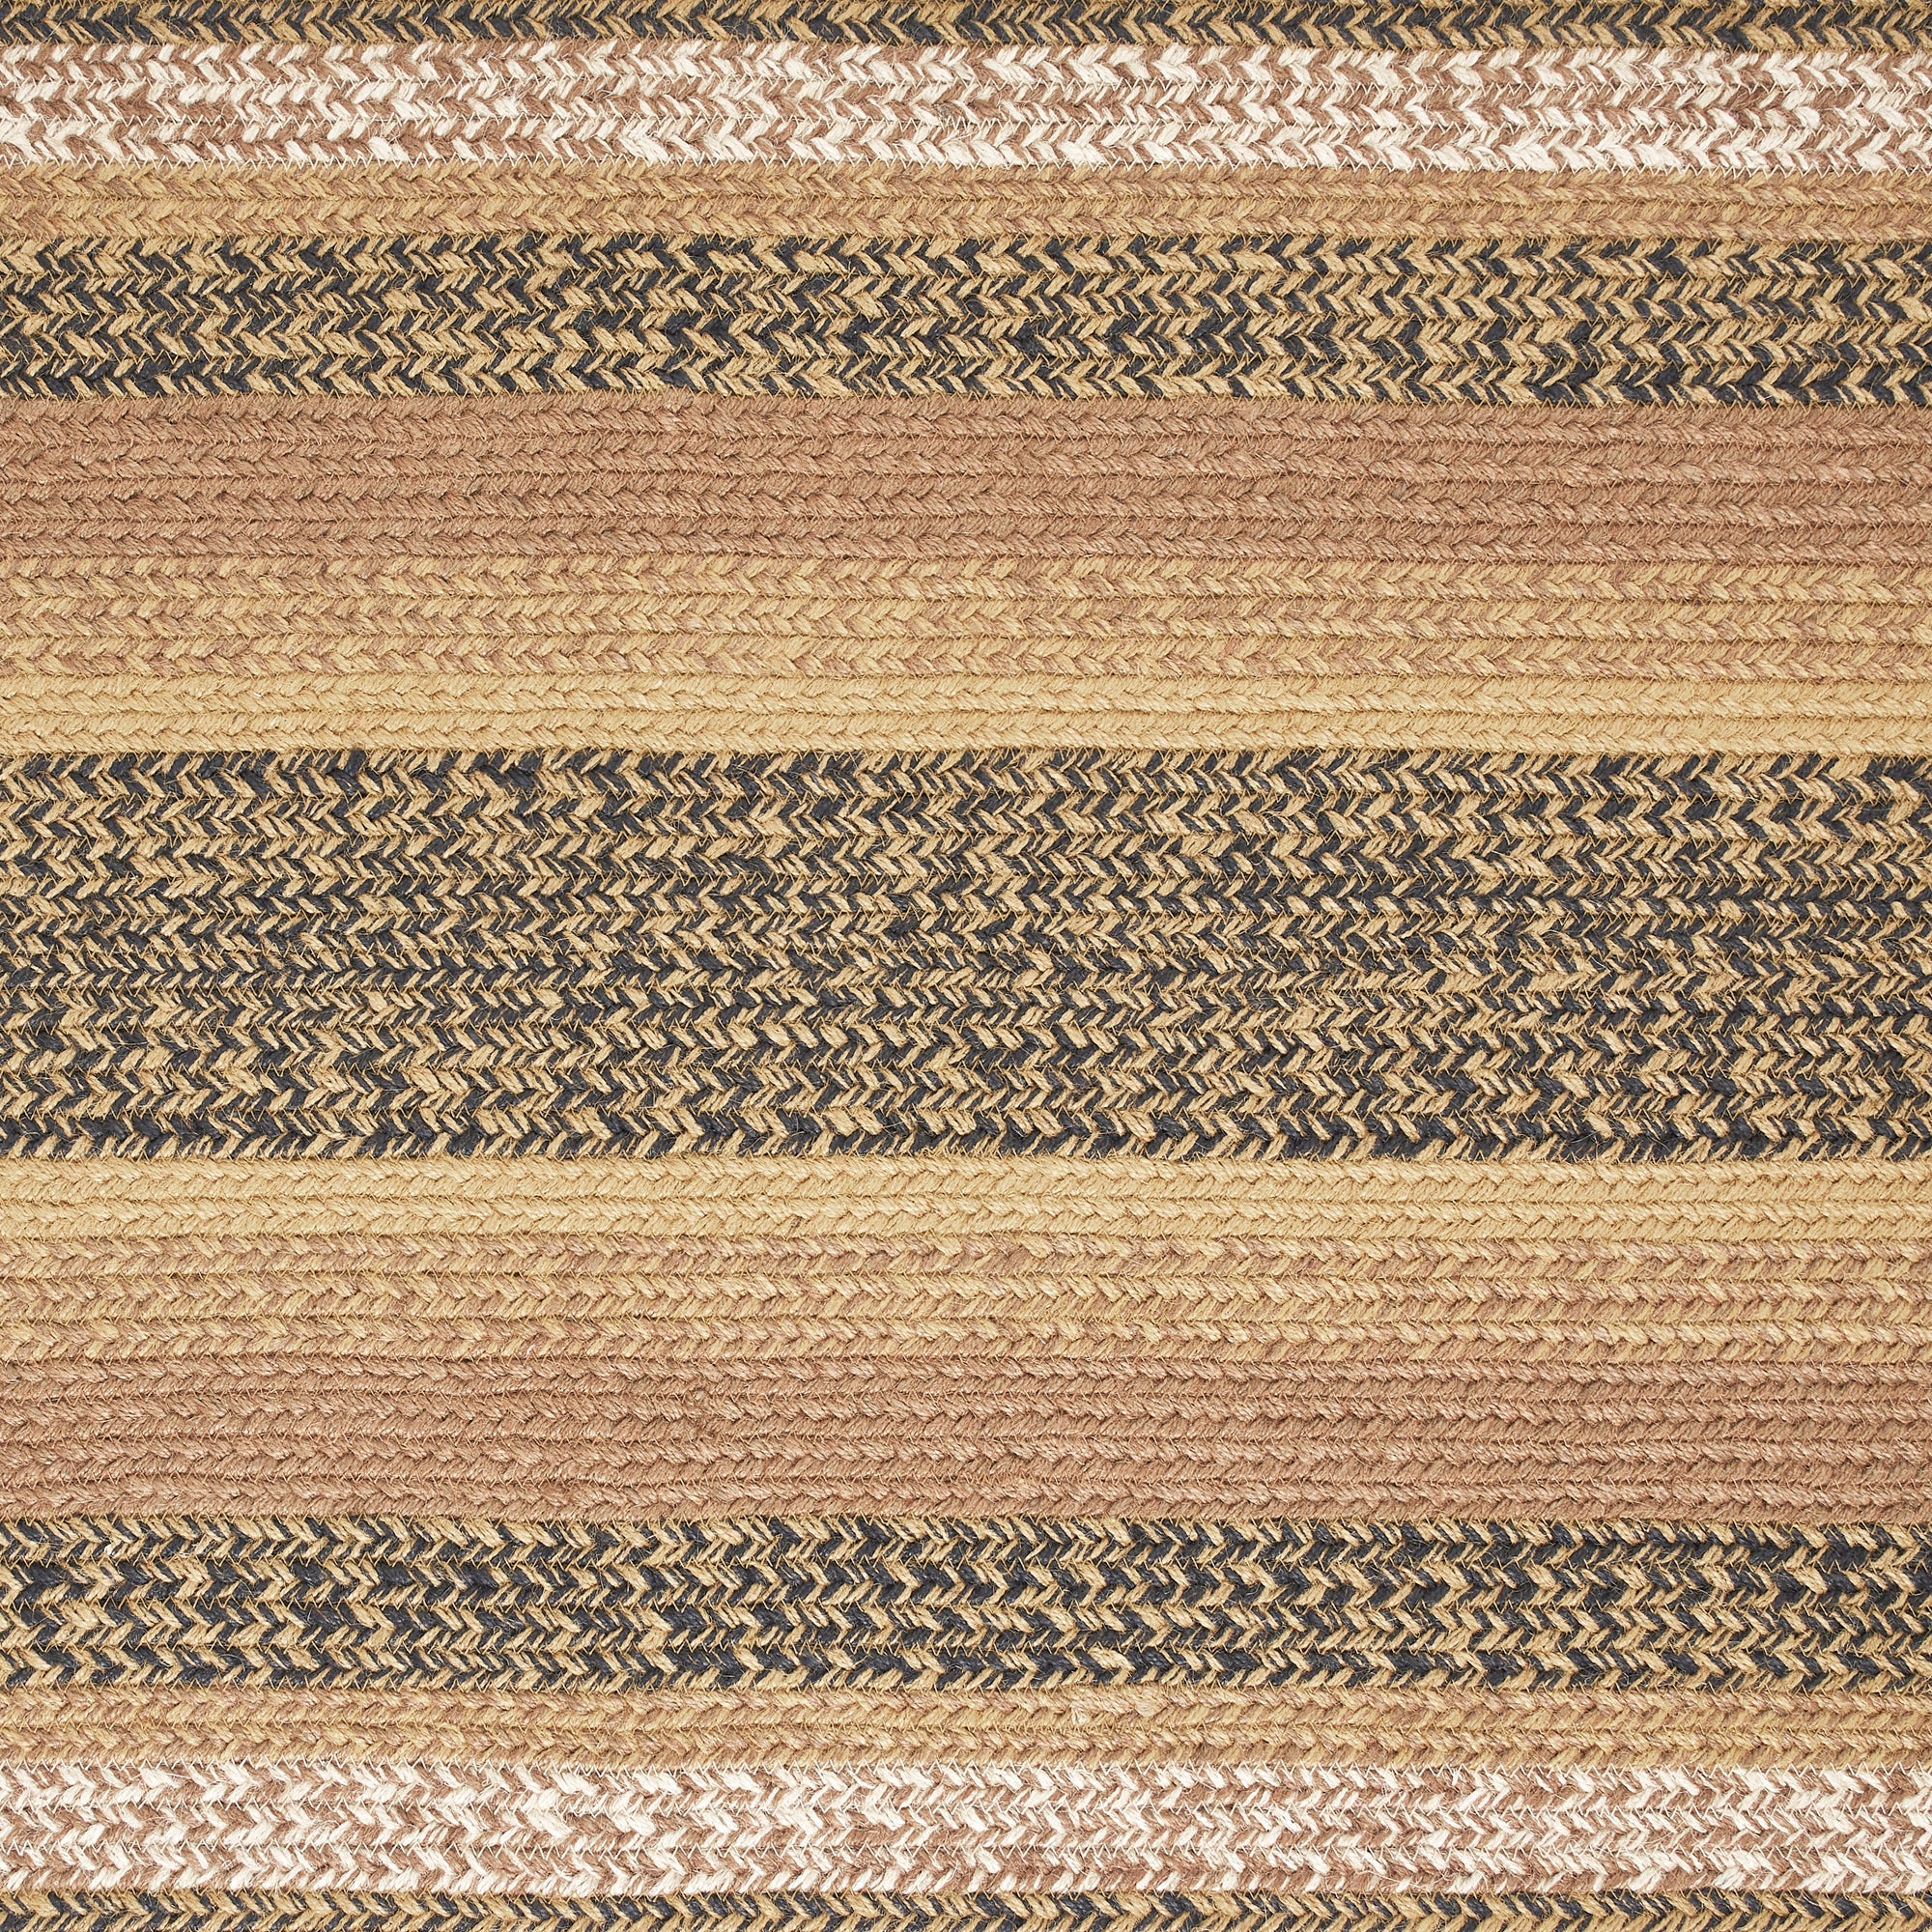 Kettle Grove Jute Braided Rug/Runner Rect. with Rug Pad 2'x6.5' VHC Brands